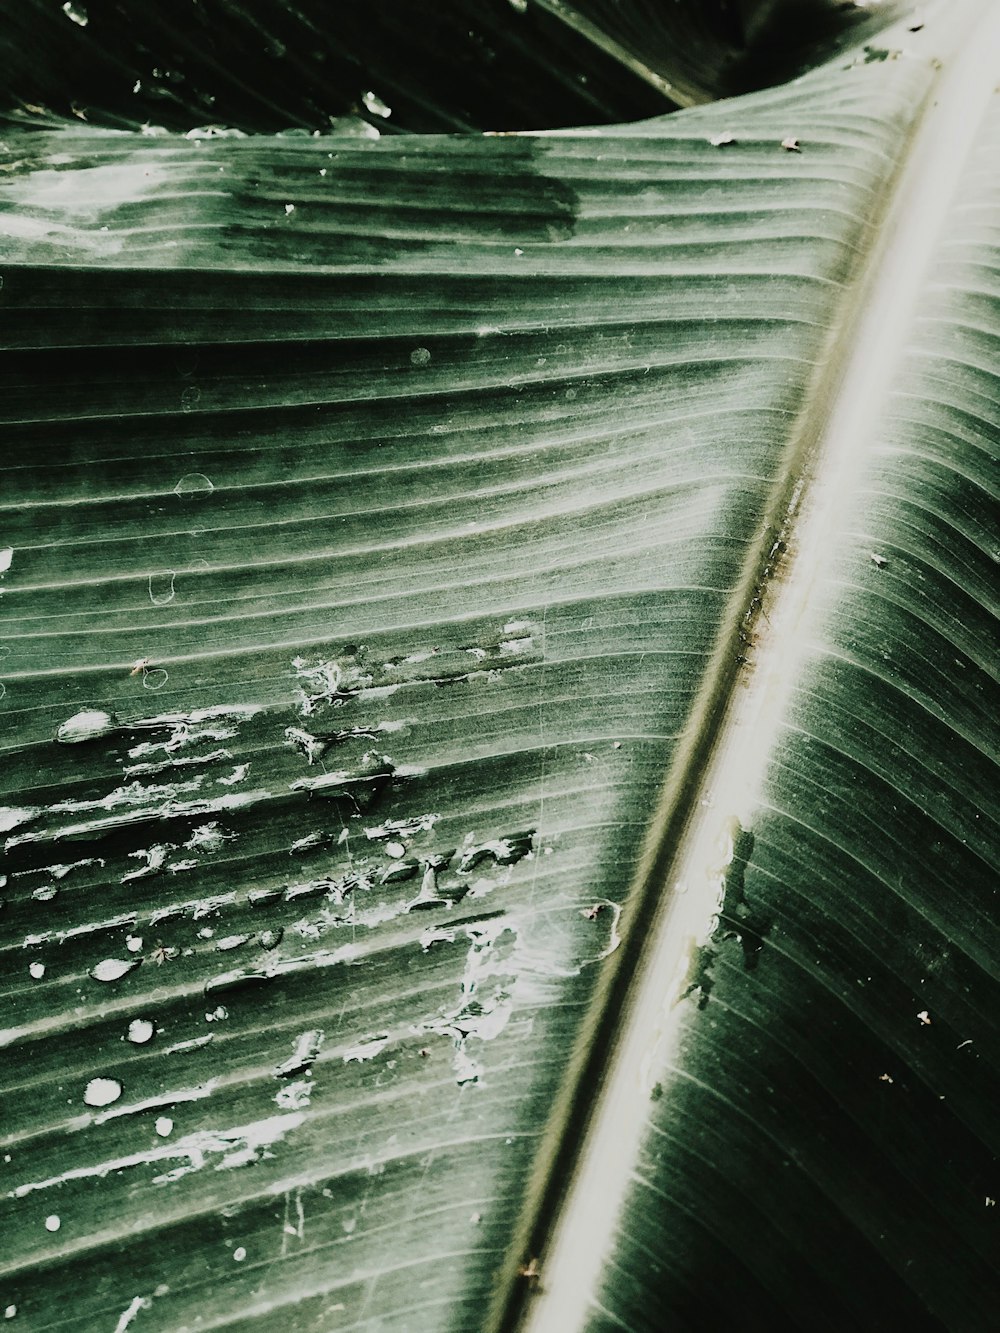 a close up of a banana leaf with drops of water on it